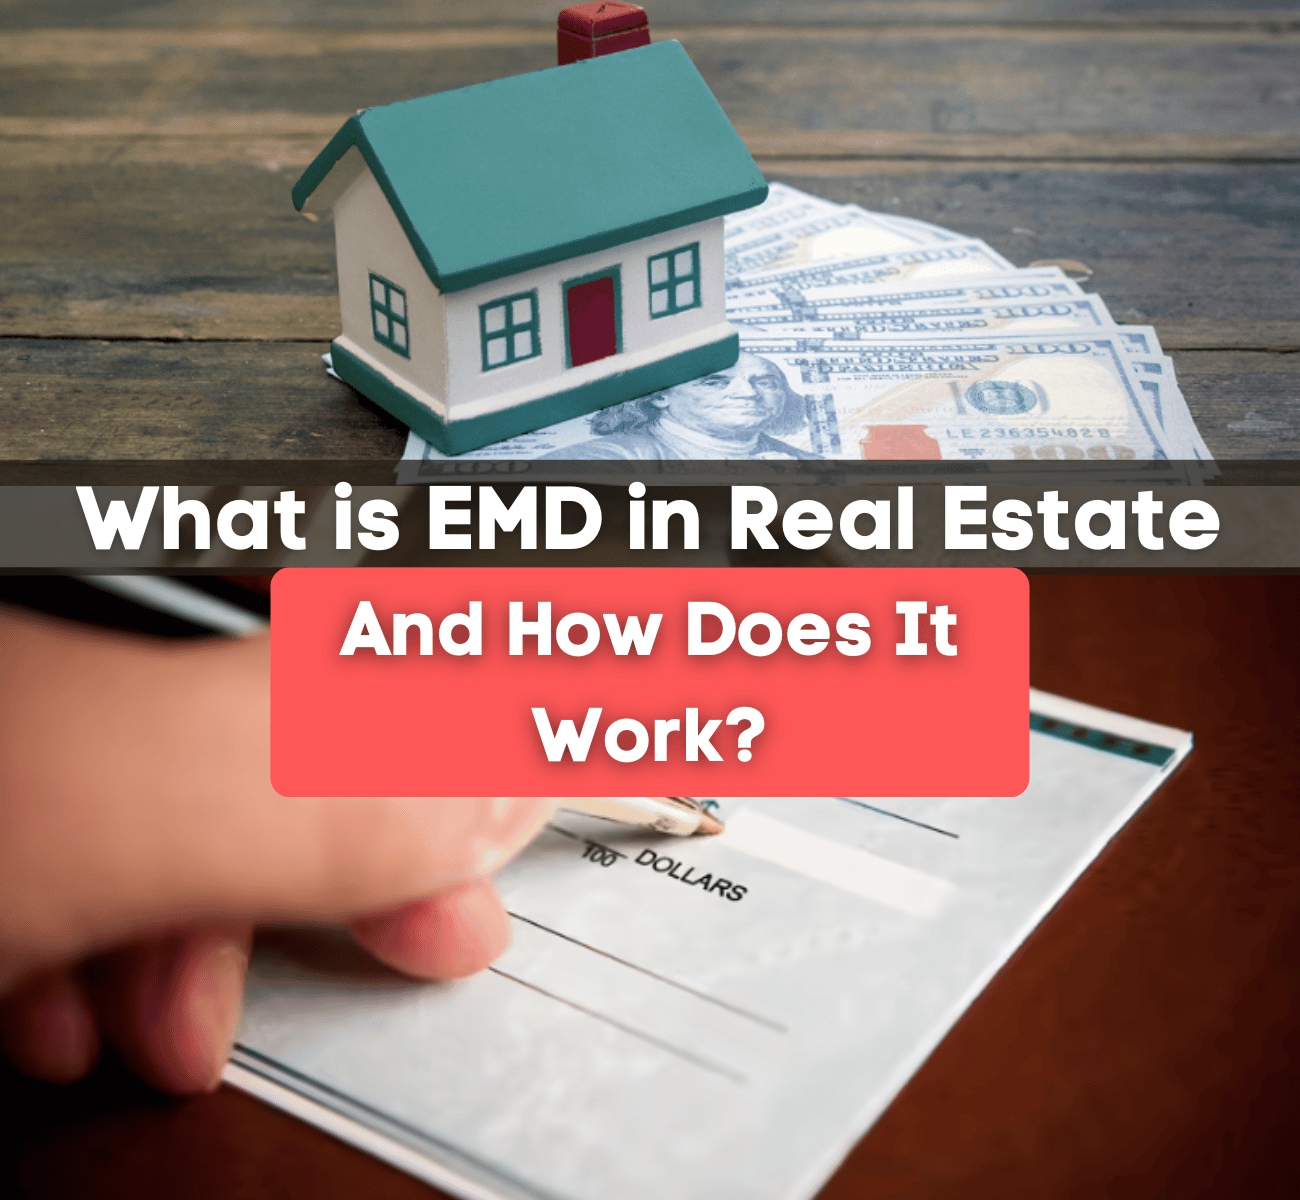 What is EMD in Real Estate and How Does It Work?